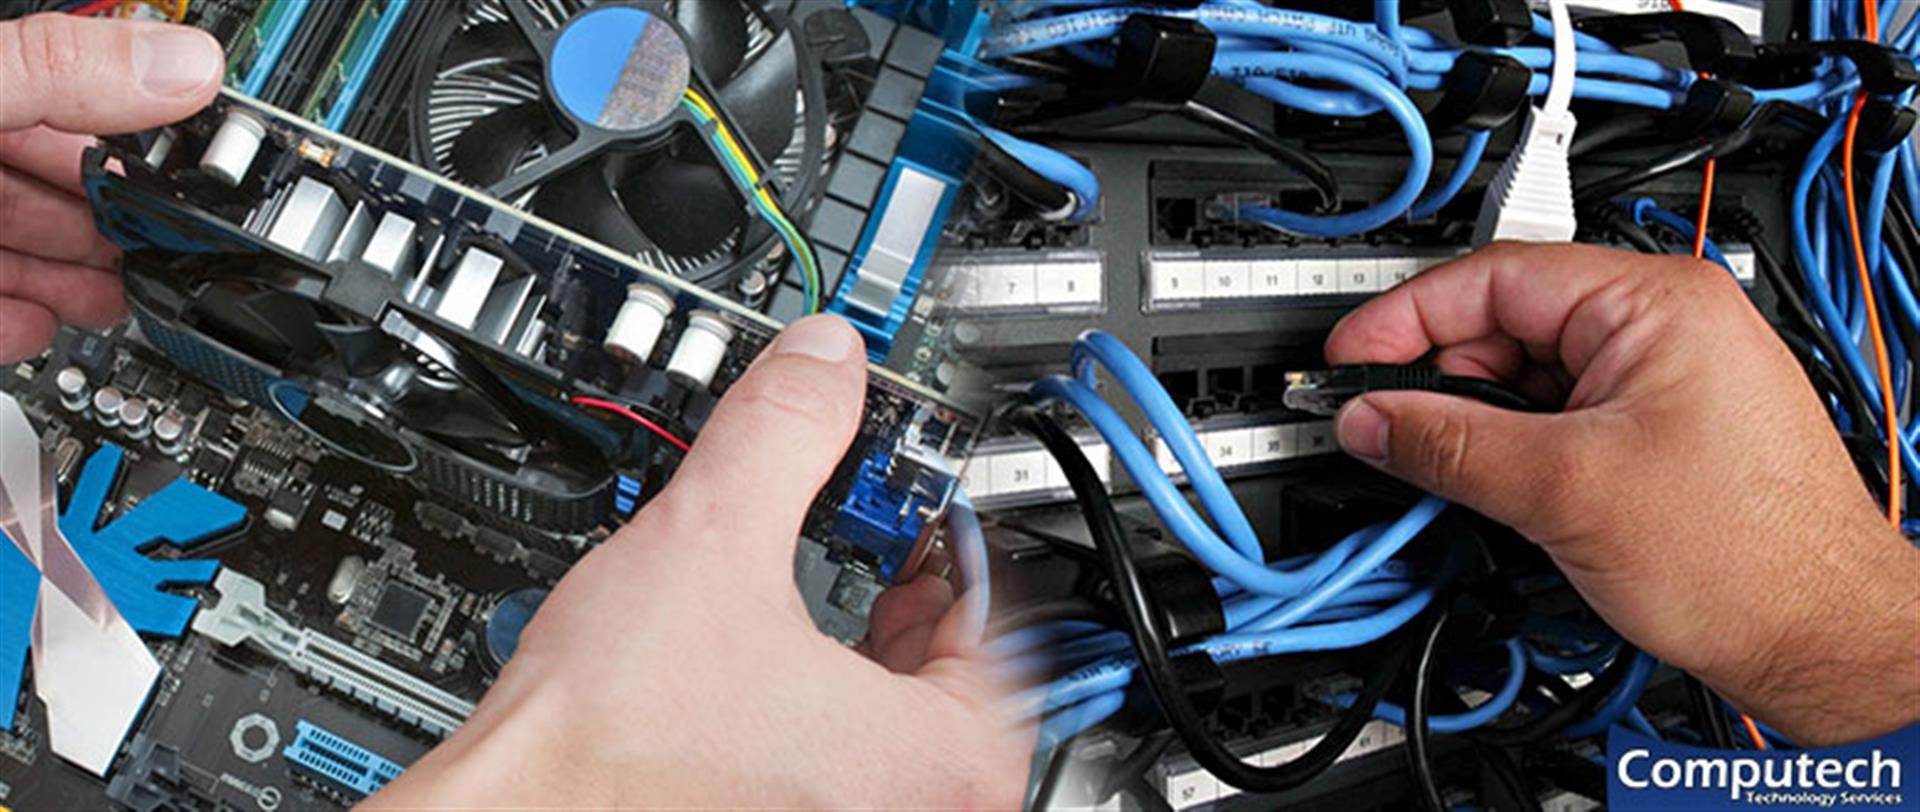 Nolensville Tennessee Onsite Computer PC & Printer Repair, Networks, Voice & Data Cabling Solutions